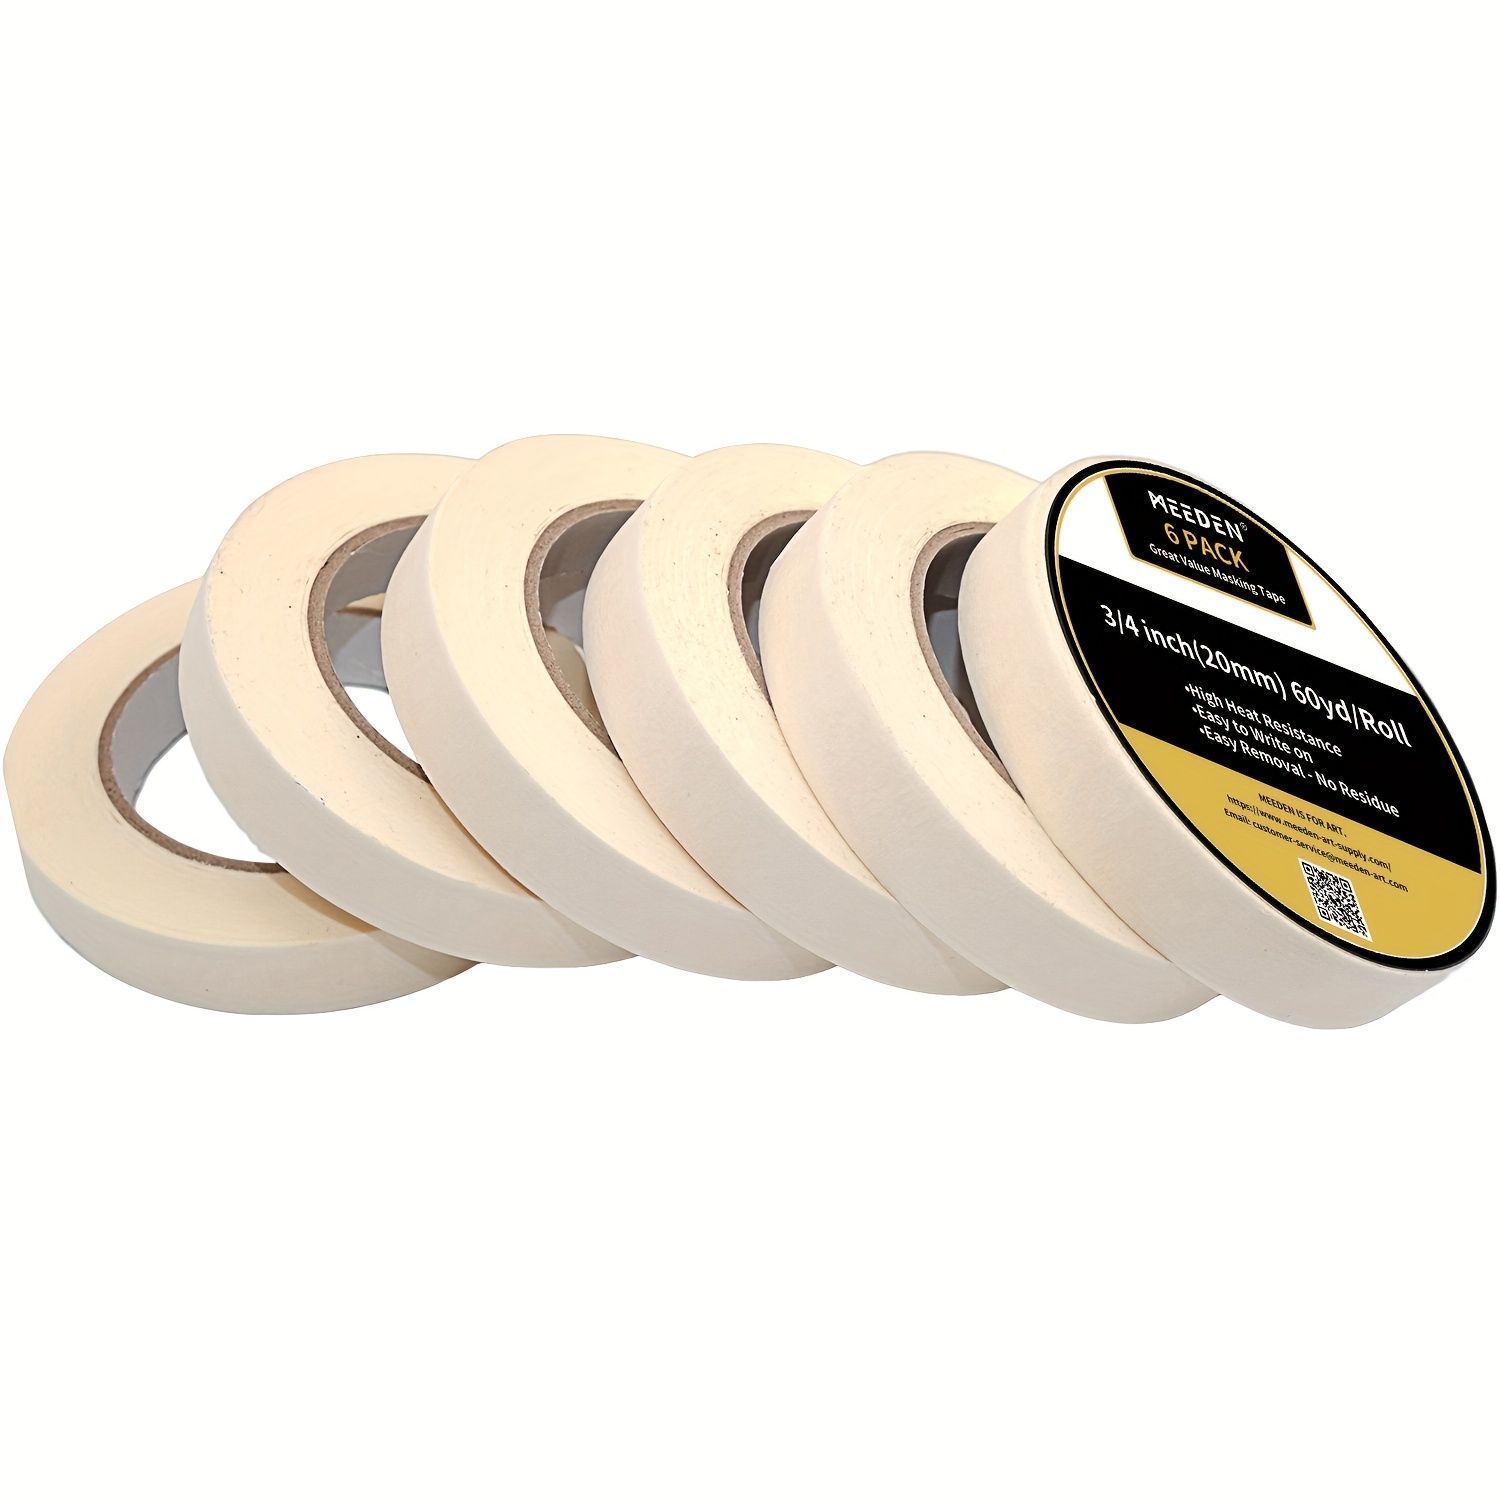 COHEALI 5 Masking Tape Canvas Pictures White Gaffer Tape Acid-free Tape  Painter's Tape Artist Tape for Watercolour Paper White Painter's Tape